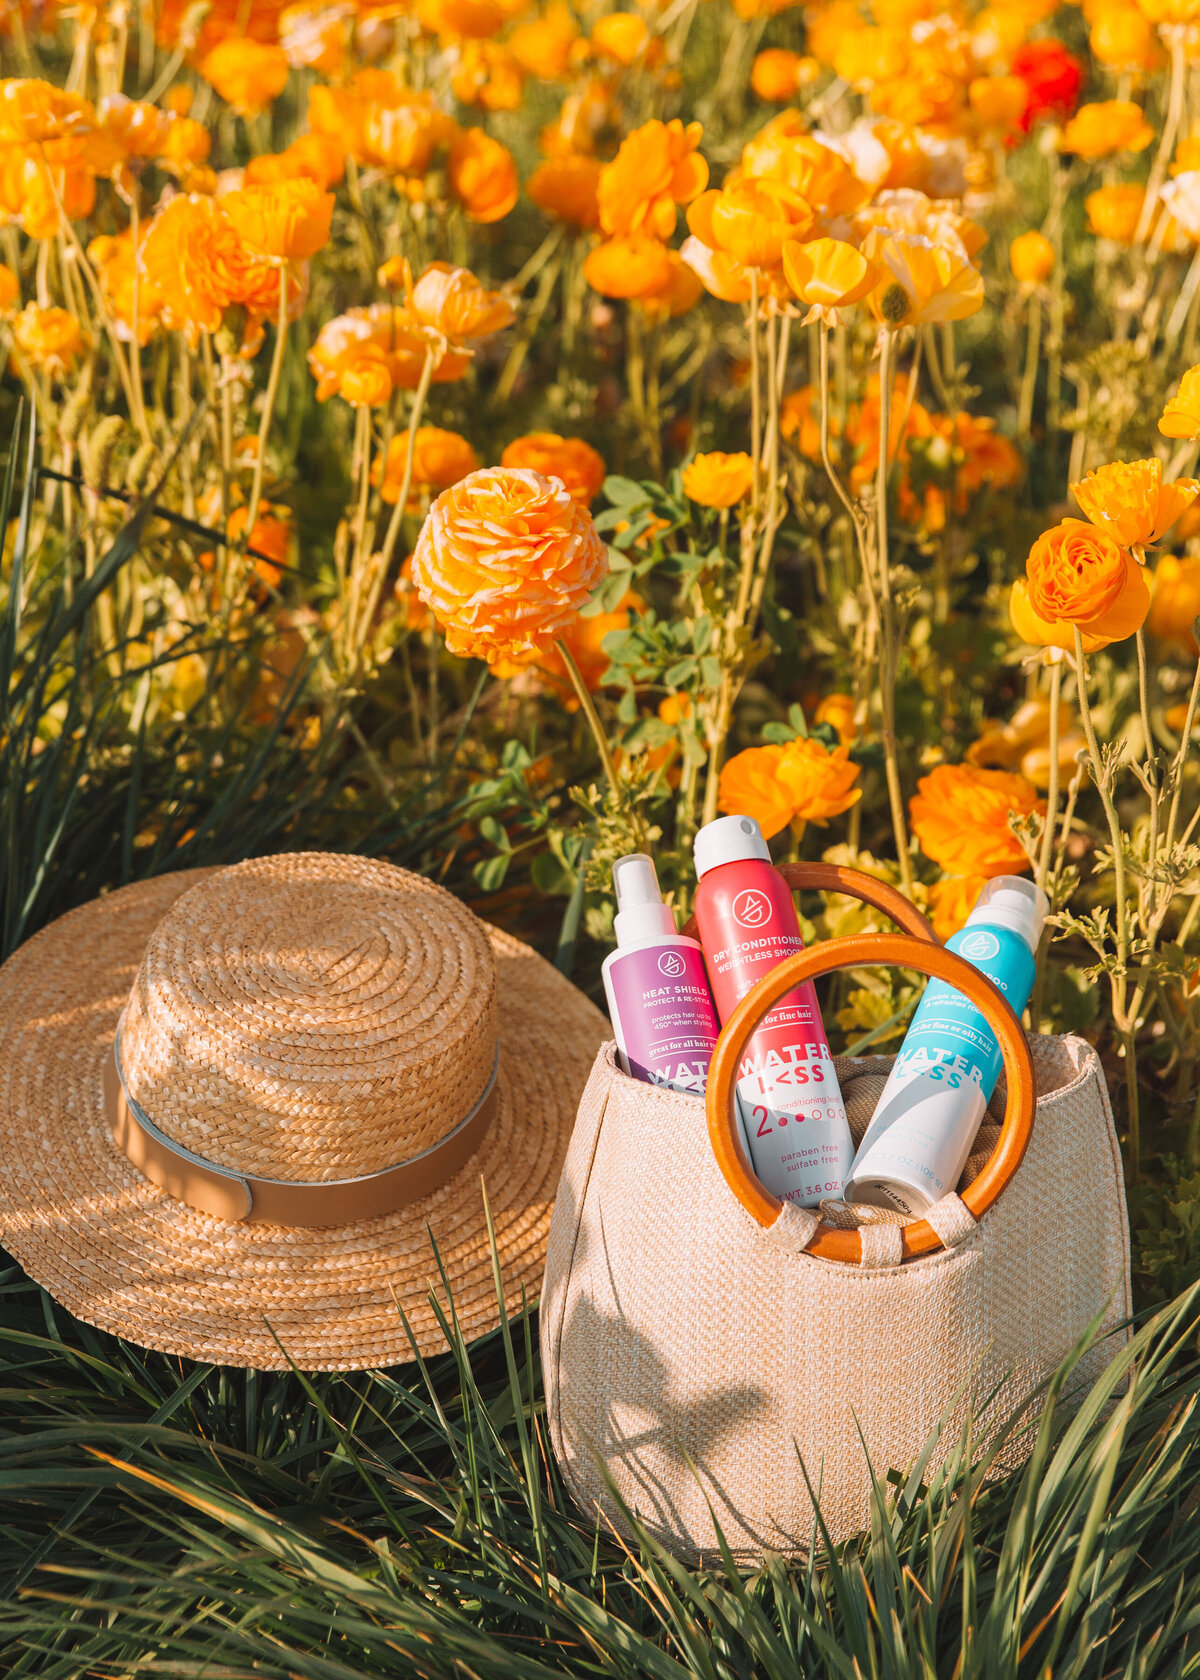 Styled product imagery in a flower field for a haircare brand